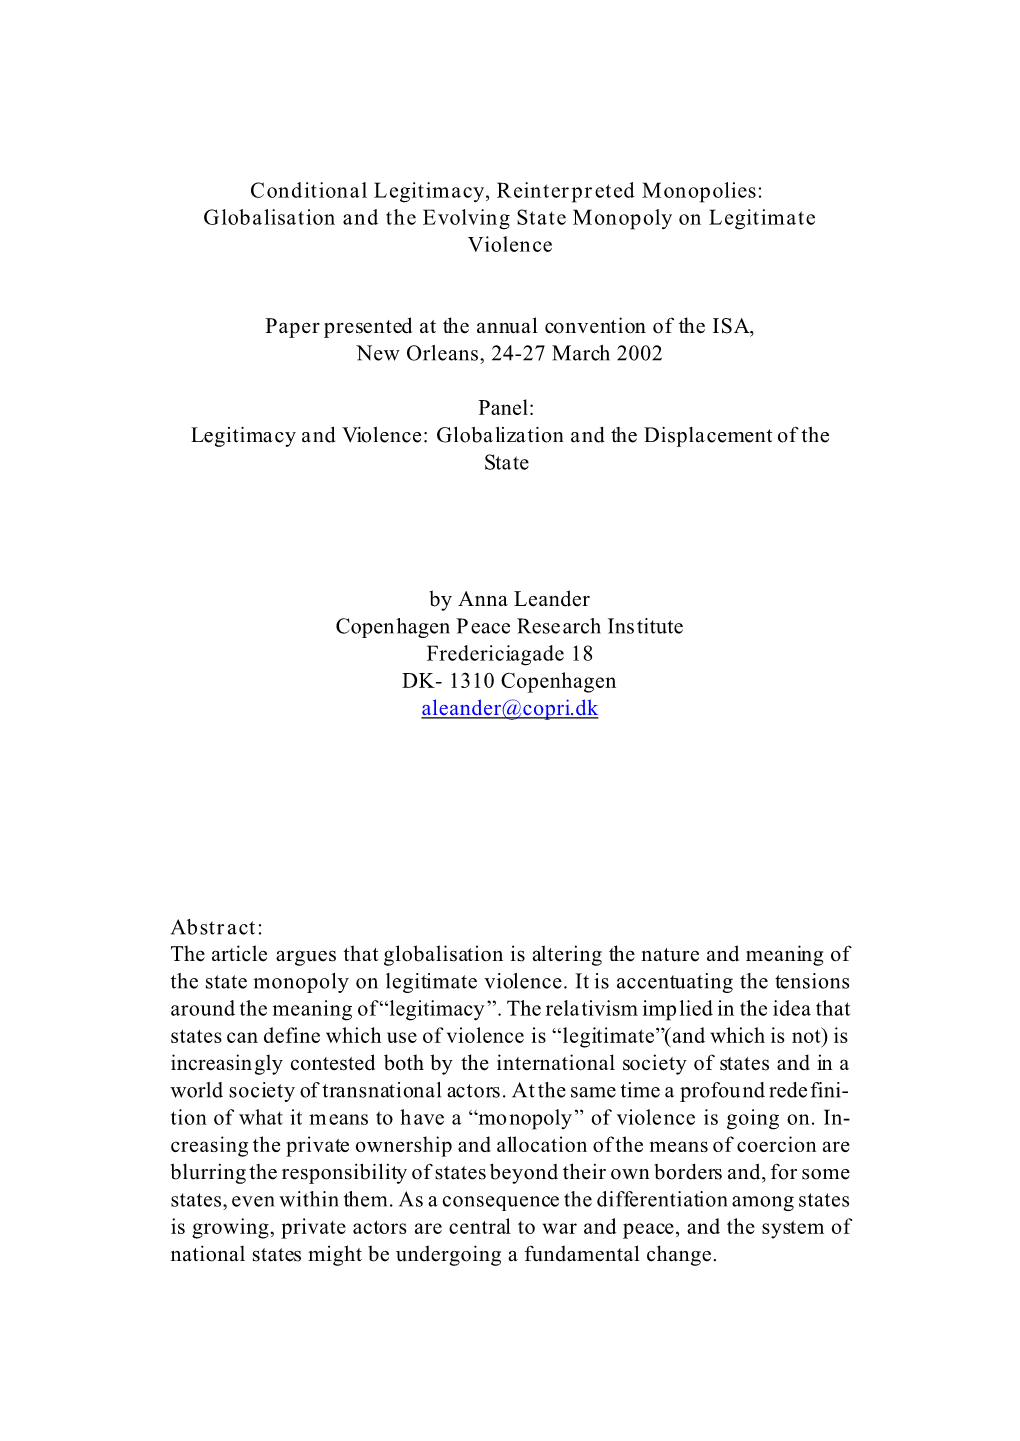 Conditional Legitimacy, Reinterpreted Monopolies: Globalisation and the Evolving State Monopoly on Legitimate Violence